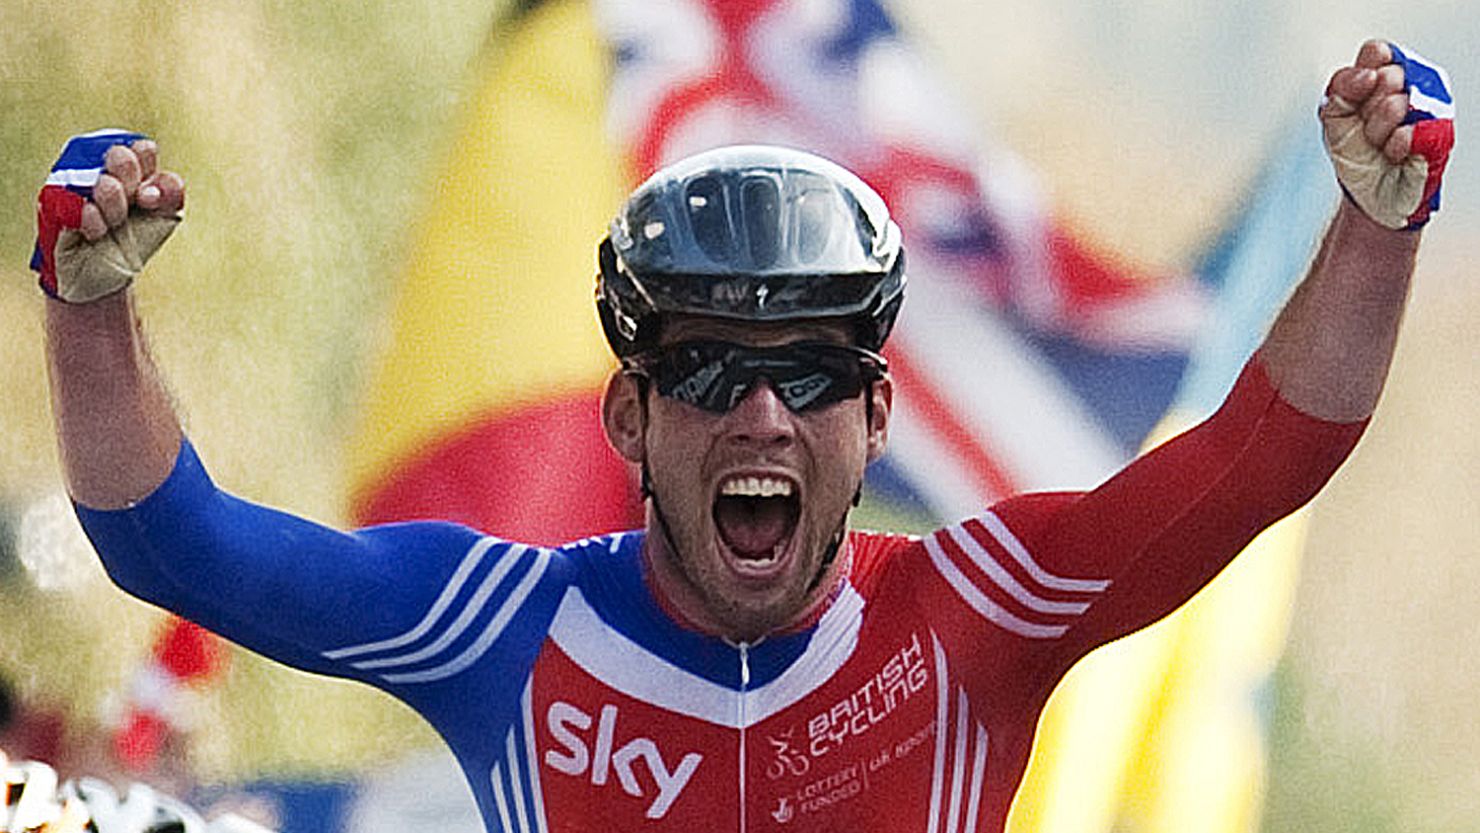 Mark Cavendish's win in the men's road race took Britain to the top of the medals table